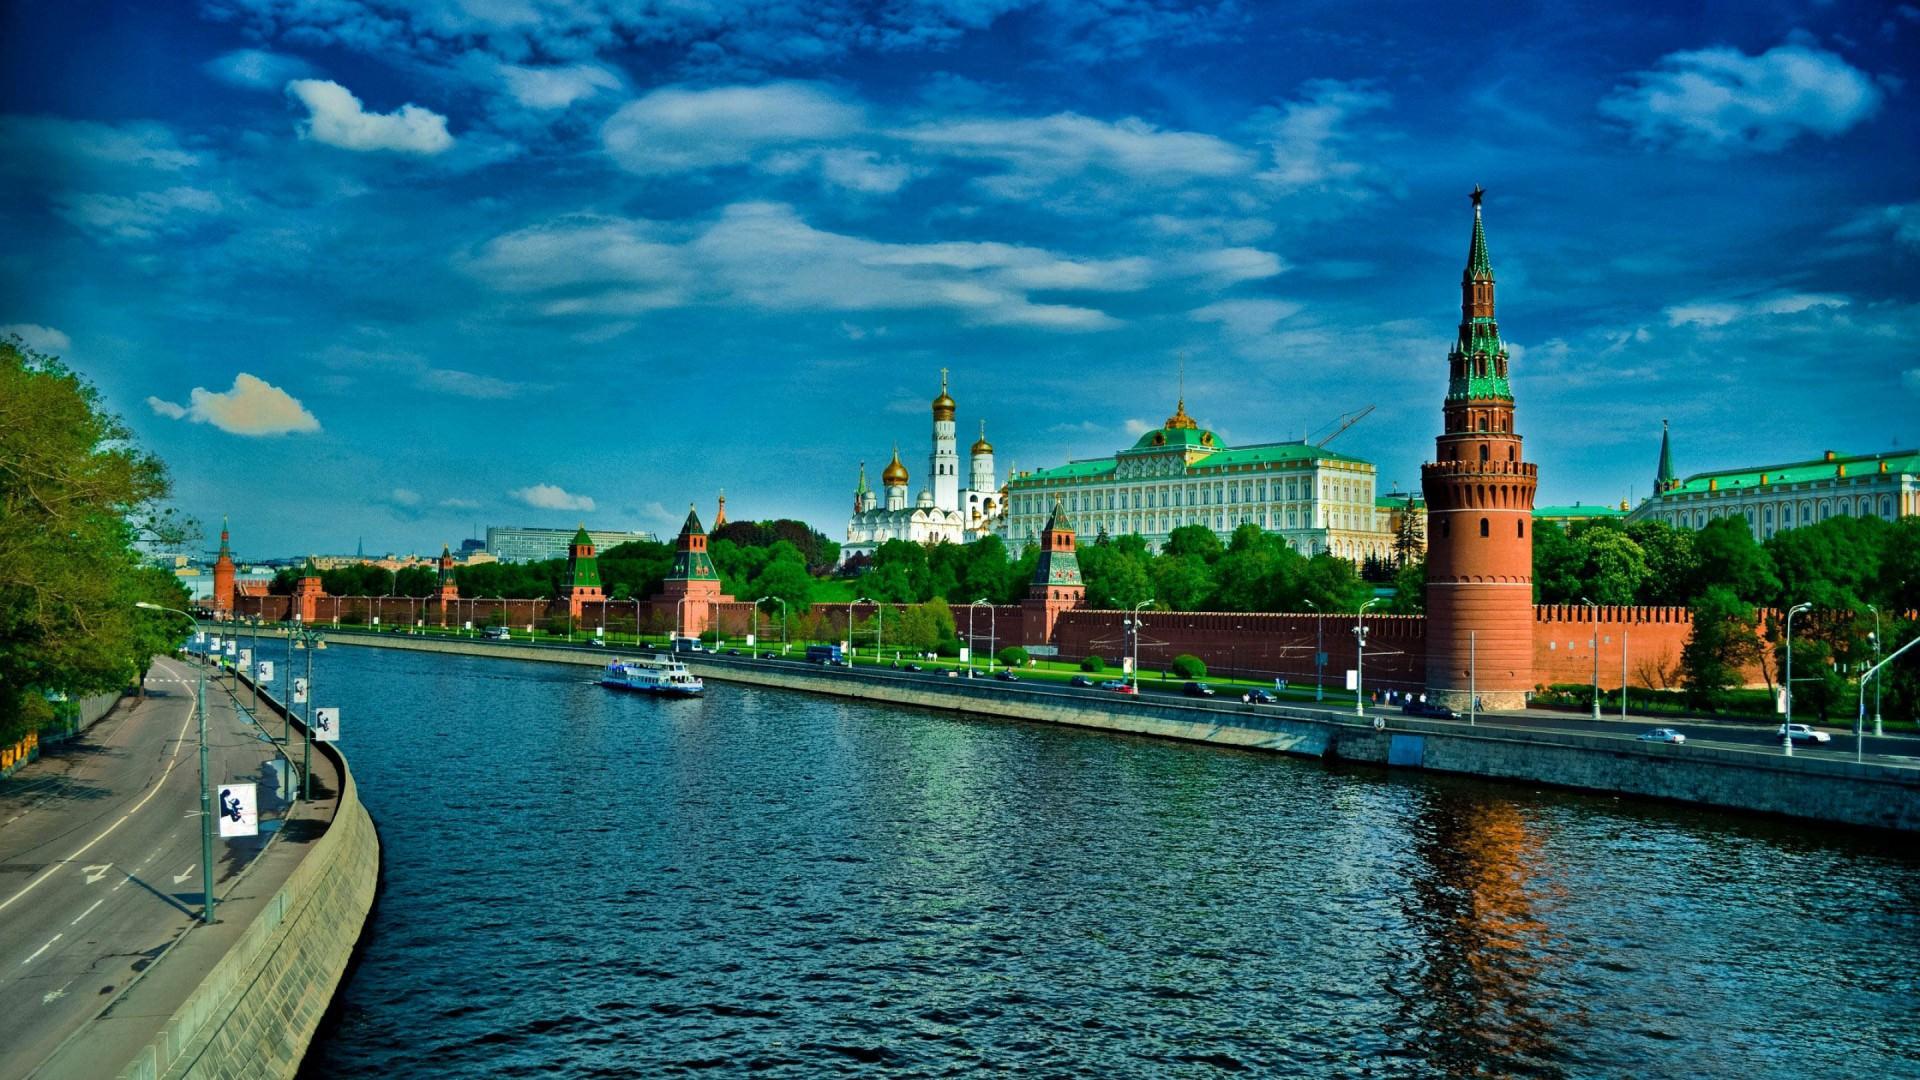 Awesome Russian HD wallpaper for your desktop